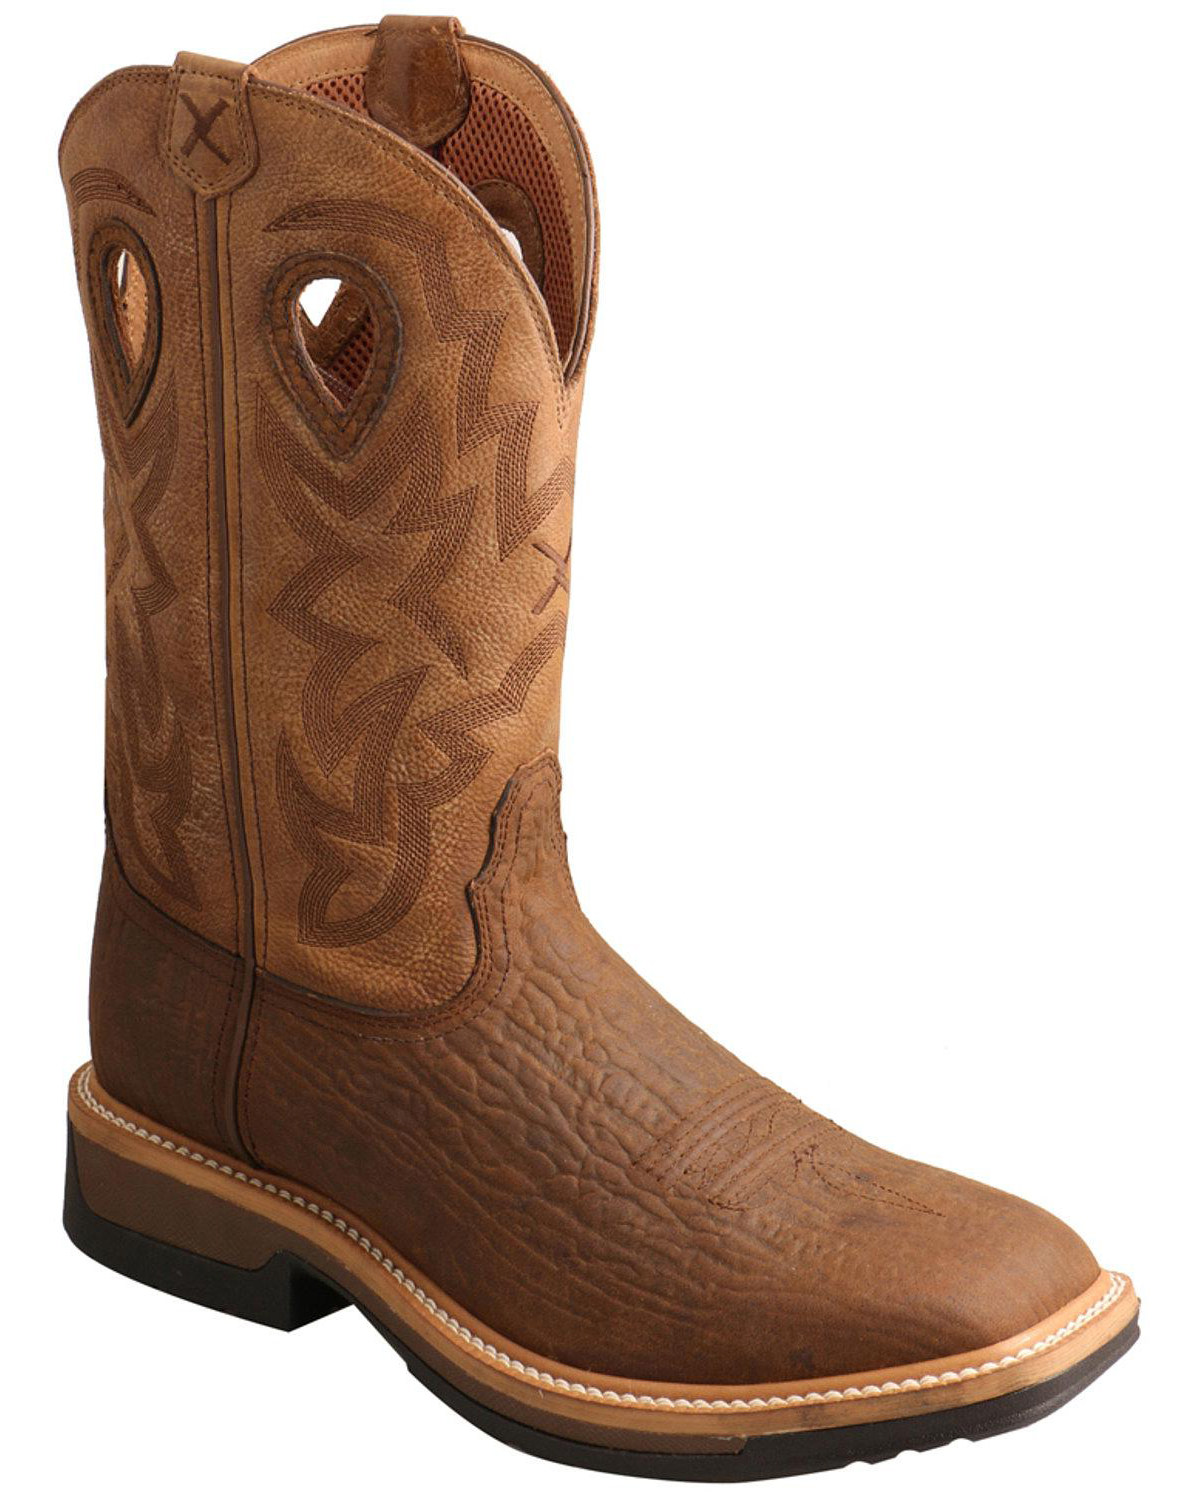 Twisted X Men's Lite Cowboy Western Work Boots - Broad Square Toe